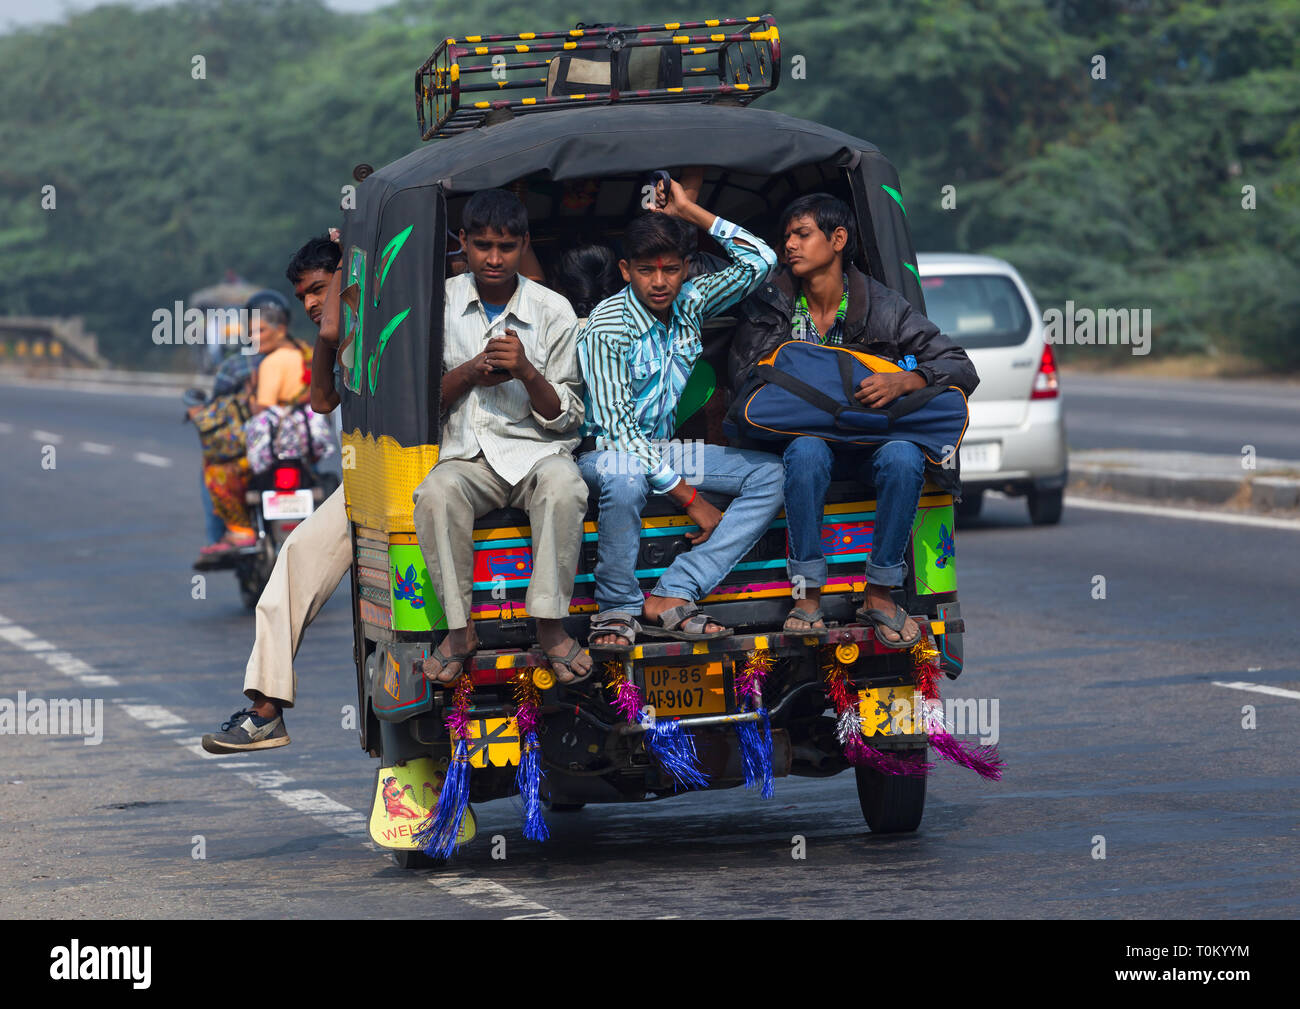 AGRA, INDIA - NOVEMBER 15, 2012: Traditional Indian family travels by car. Indian people and their colorful culture Stock Photo